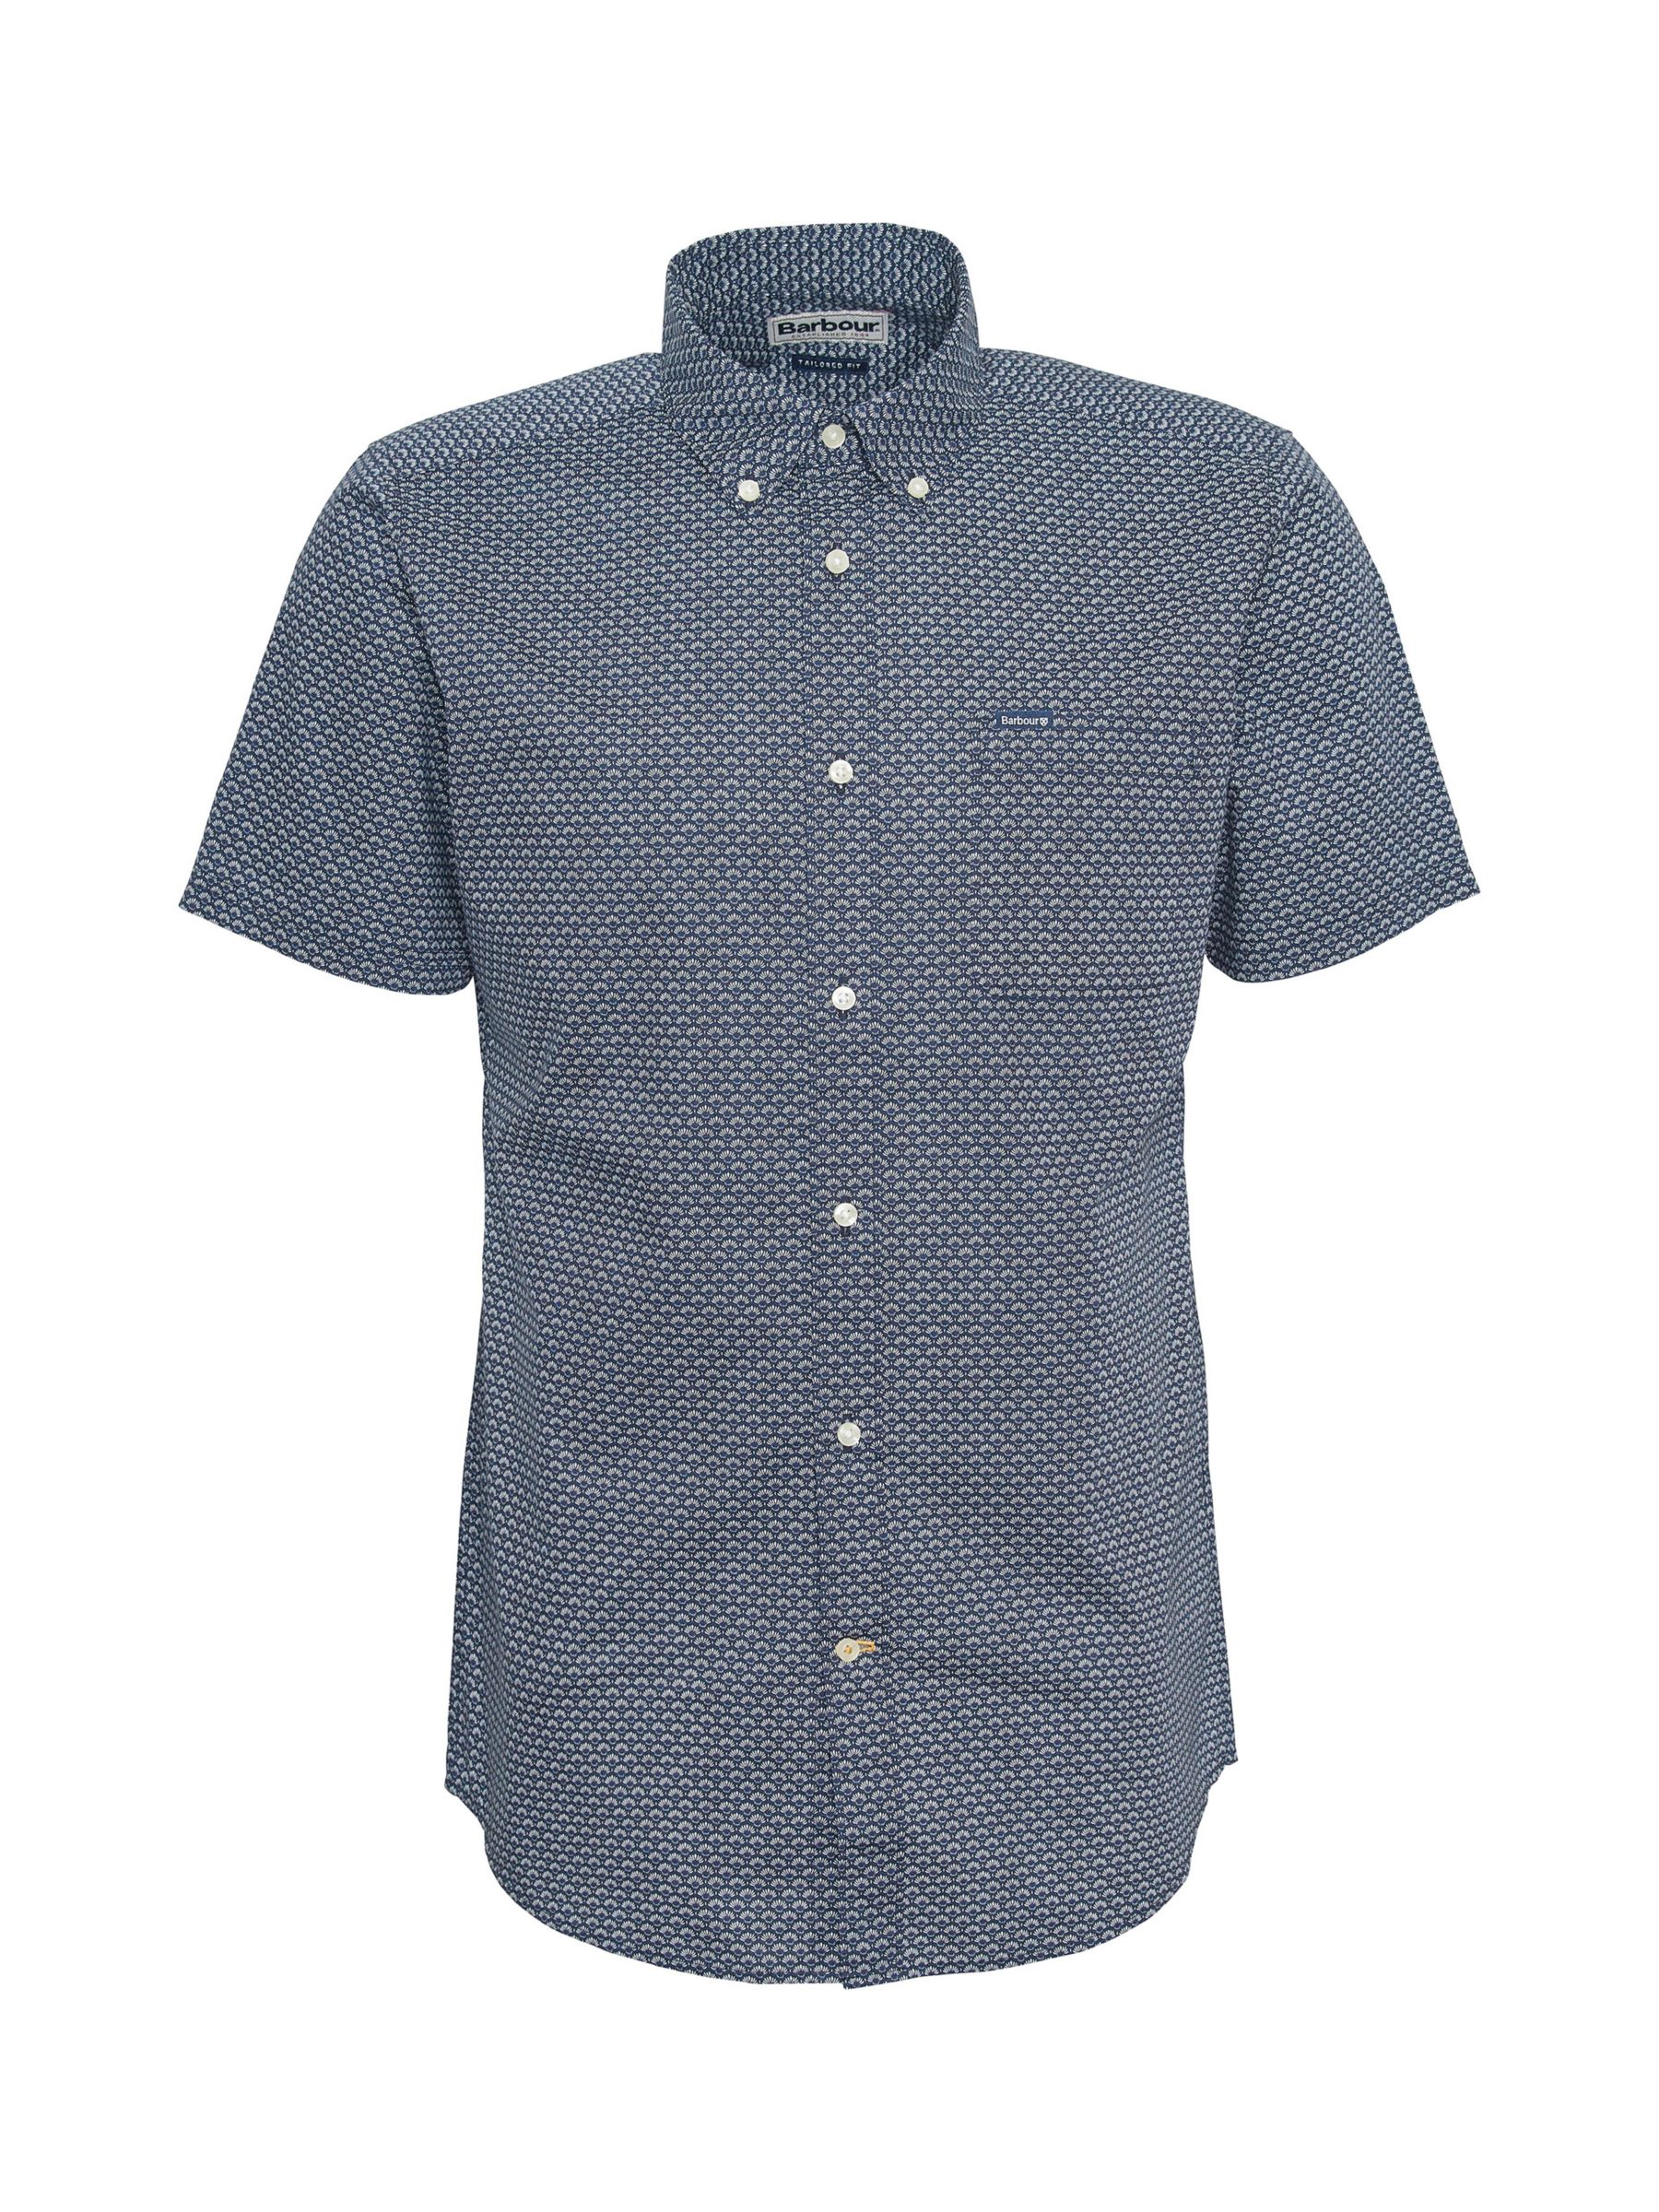 Barbour Shell Cotton Short Sleeve Tailored Shirt, Navy, S